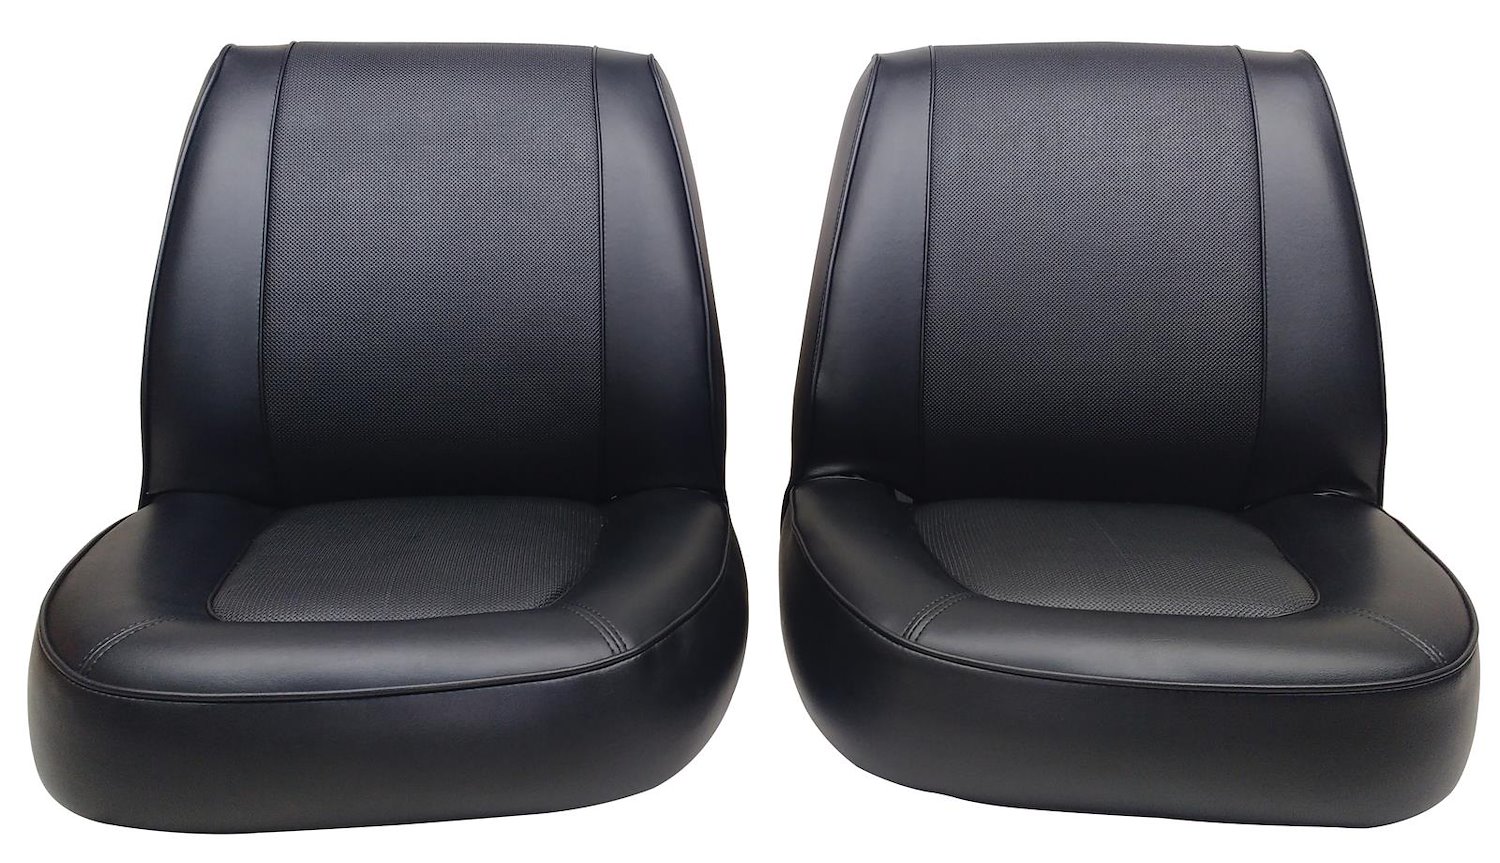 1967 Mercury Cougar XR-7 Interior Front Bucket Seat Upholstery Set